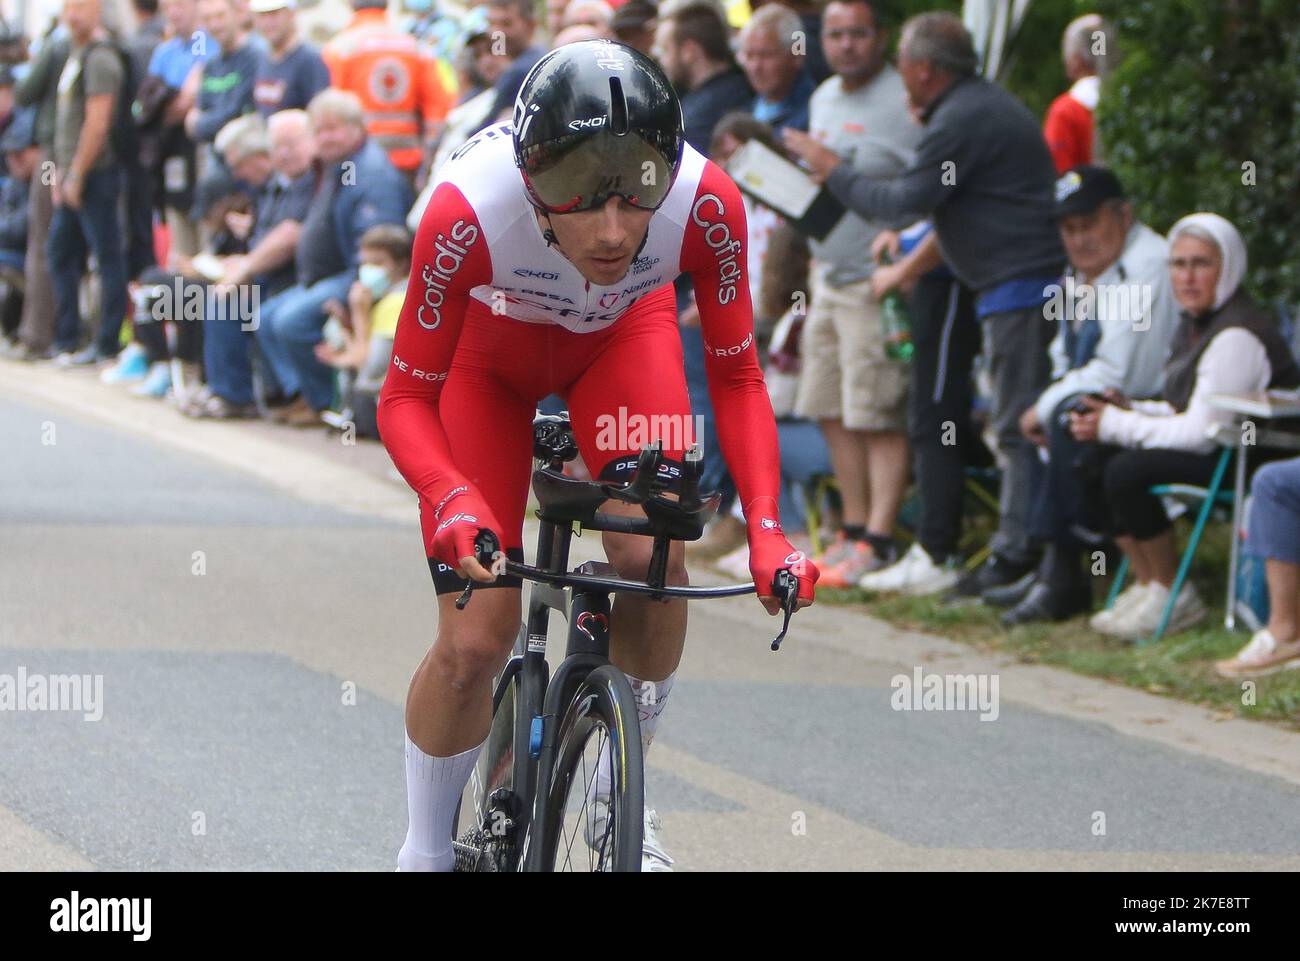 ©Laurent Lairys/MAXPPP - GUILLAUME MARTIN of COFIDIS during the Tour de France 2021, Cycling race stage 5, time trial, Change - Laval (27,2 Km) on June 30, 2021 in Laval, France - Photo Laurent Lairys / MAXPPP - 2021 Tour de France stage 5 time trial June 30 2021  Stock Photo